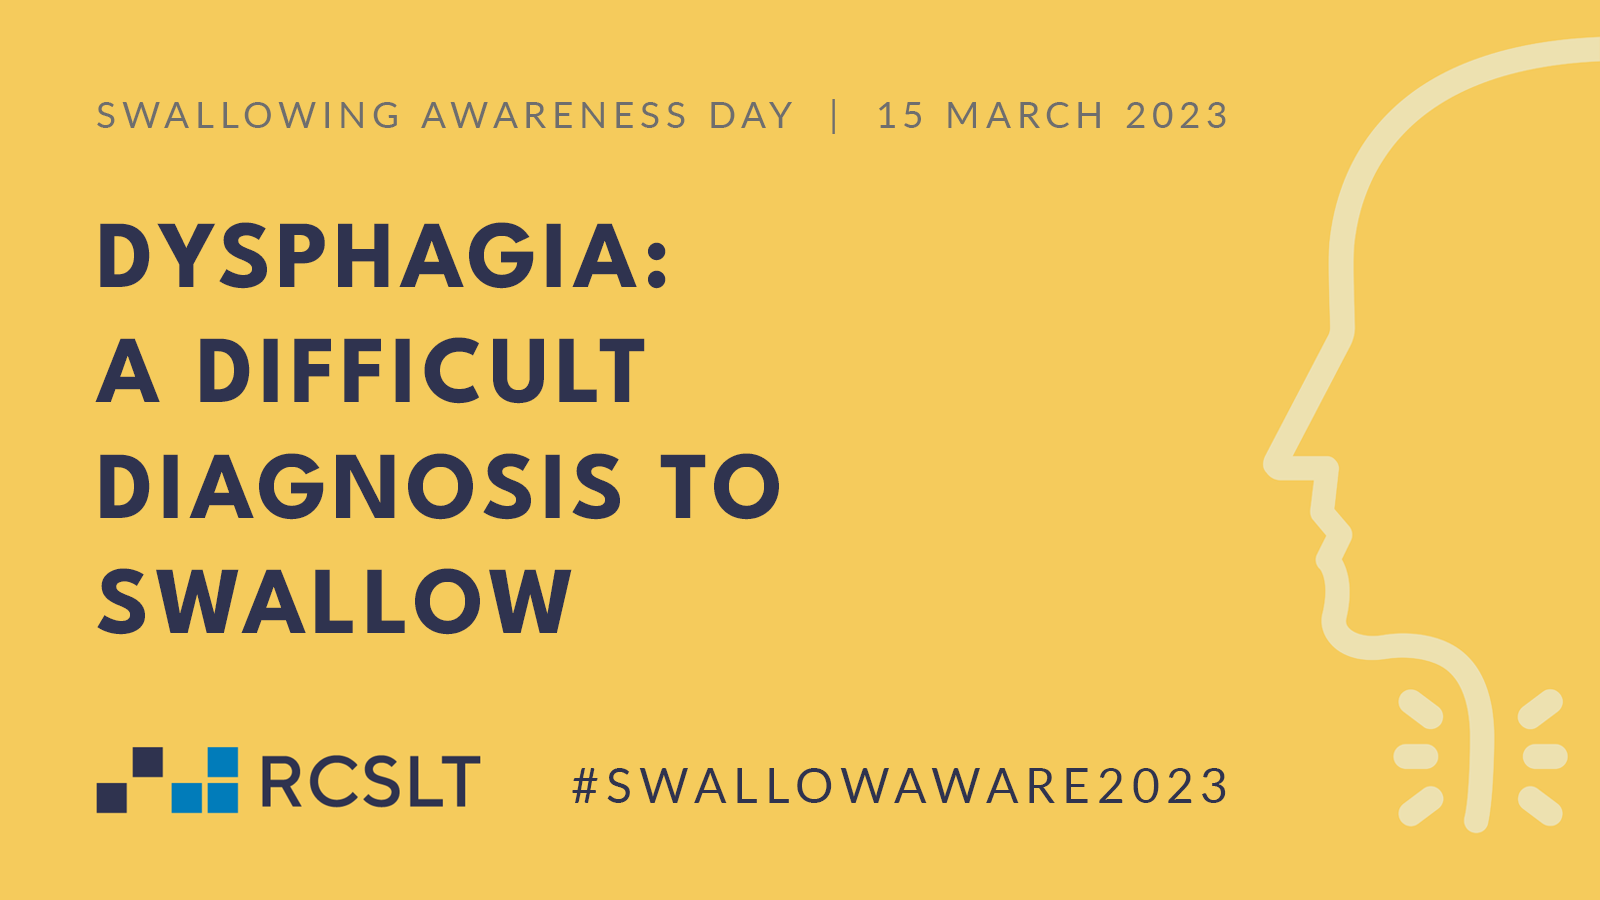 Swallowing Awareness Day 2023 Twitter Post graphic